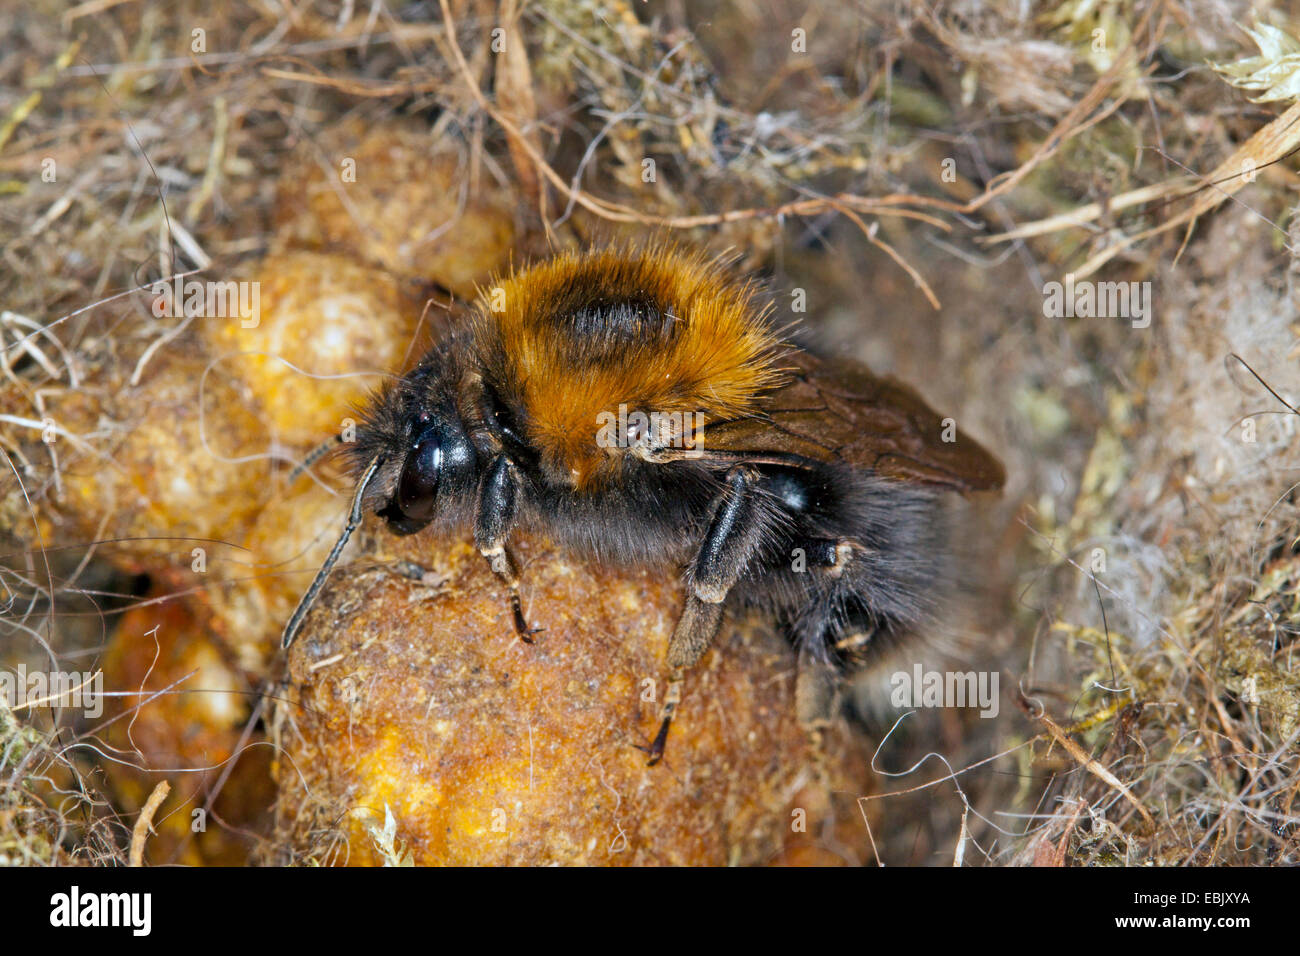 Bumblebee Nest High Resolution Stock Photography and Images - Alamy